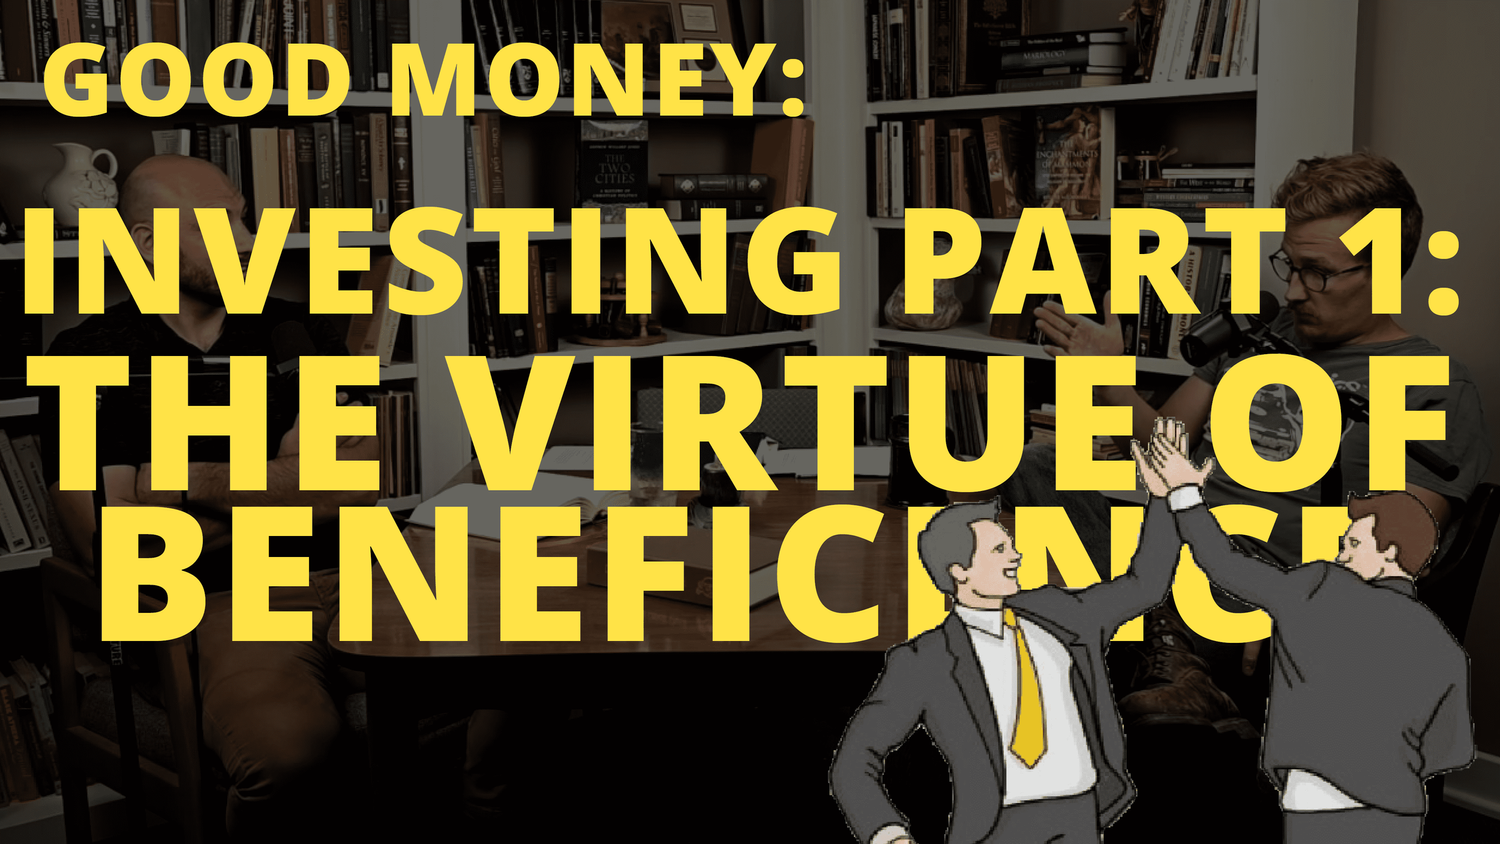 Good Money: Investing Part 1, The Virtue of Beneficence